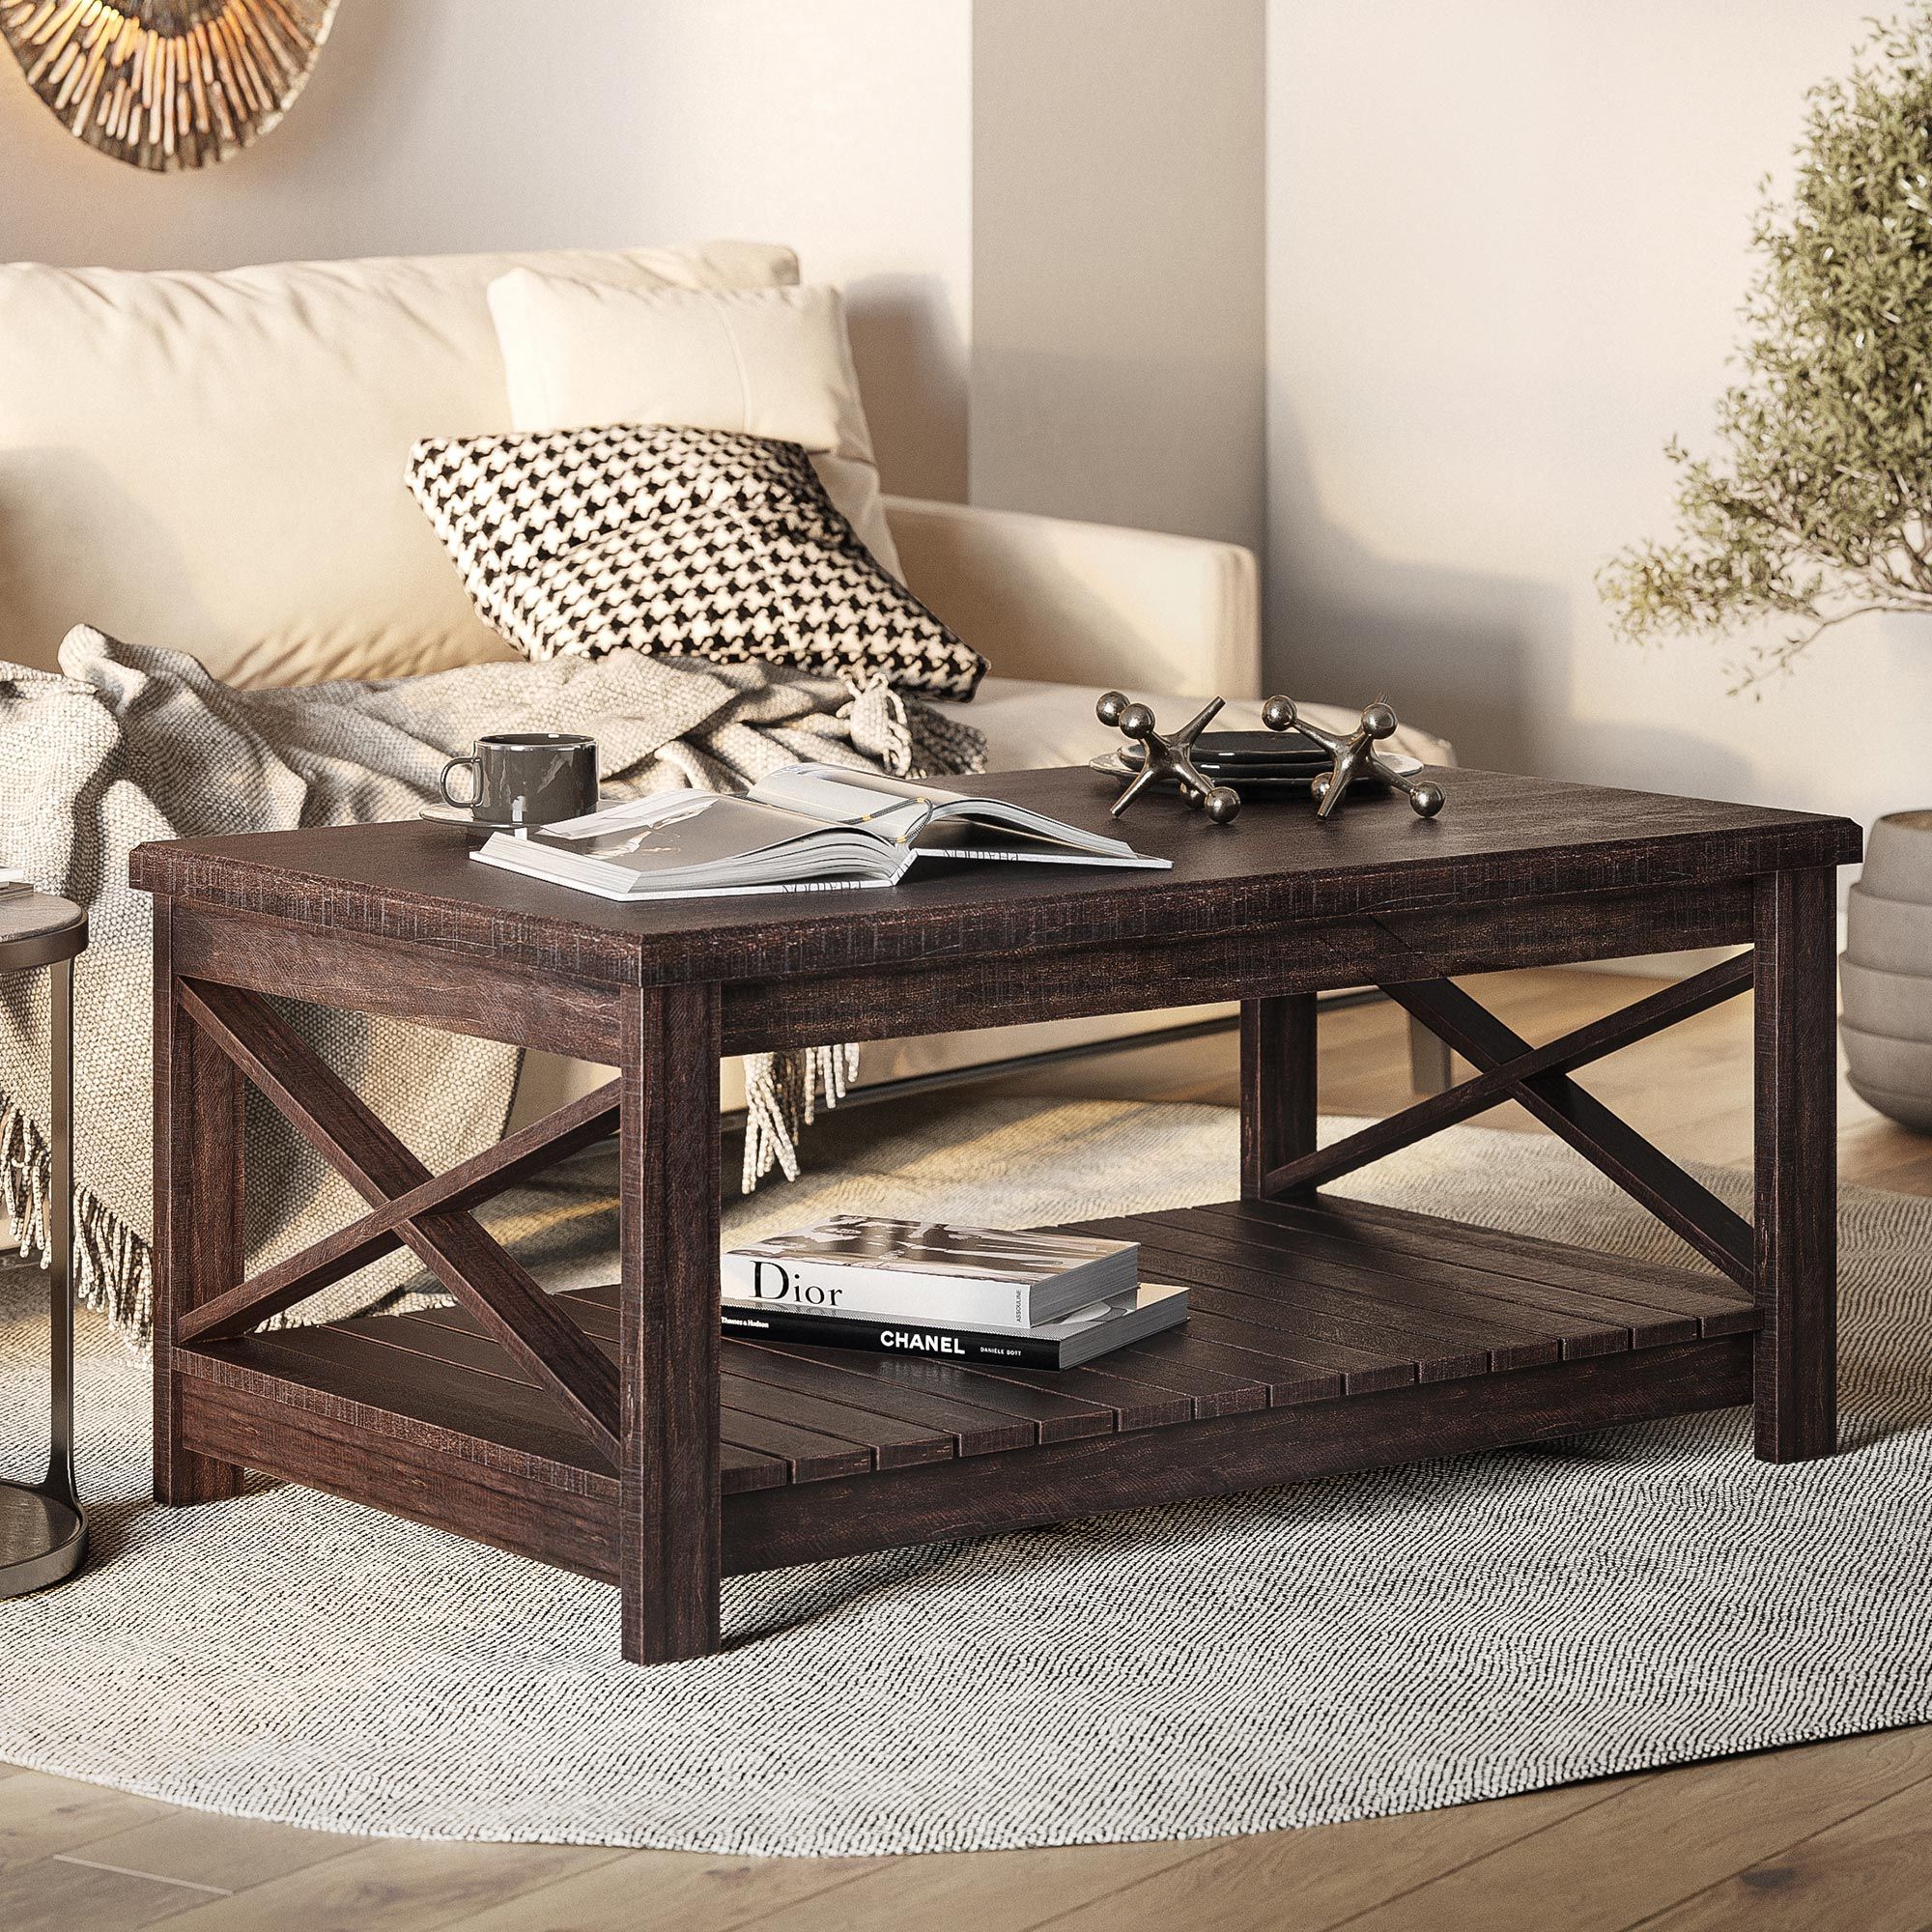 Modern Farmhouse Industrial Style Coffee Table With Storage Shelf, 2 Colors  | Ebay In Modern Farmhouse Coffee Table Sets (View 9 of 15)